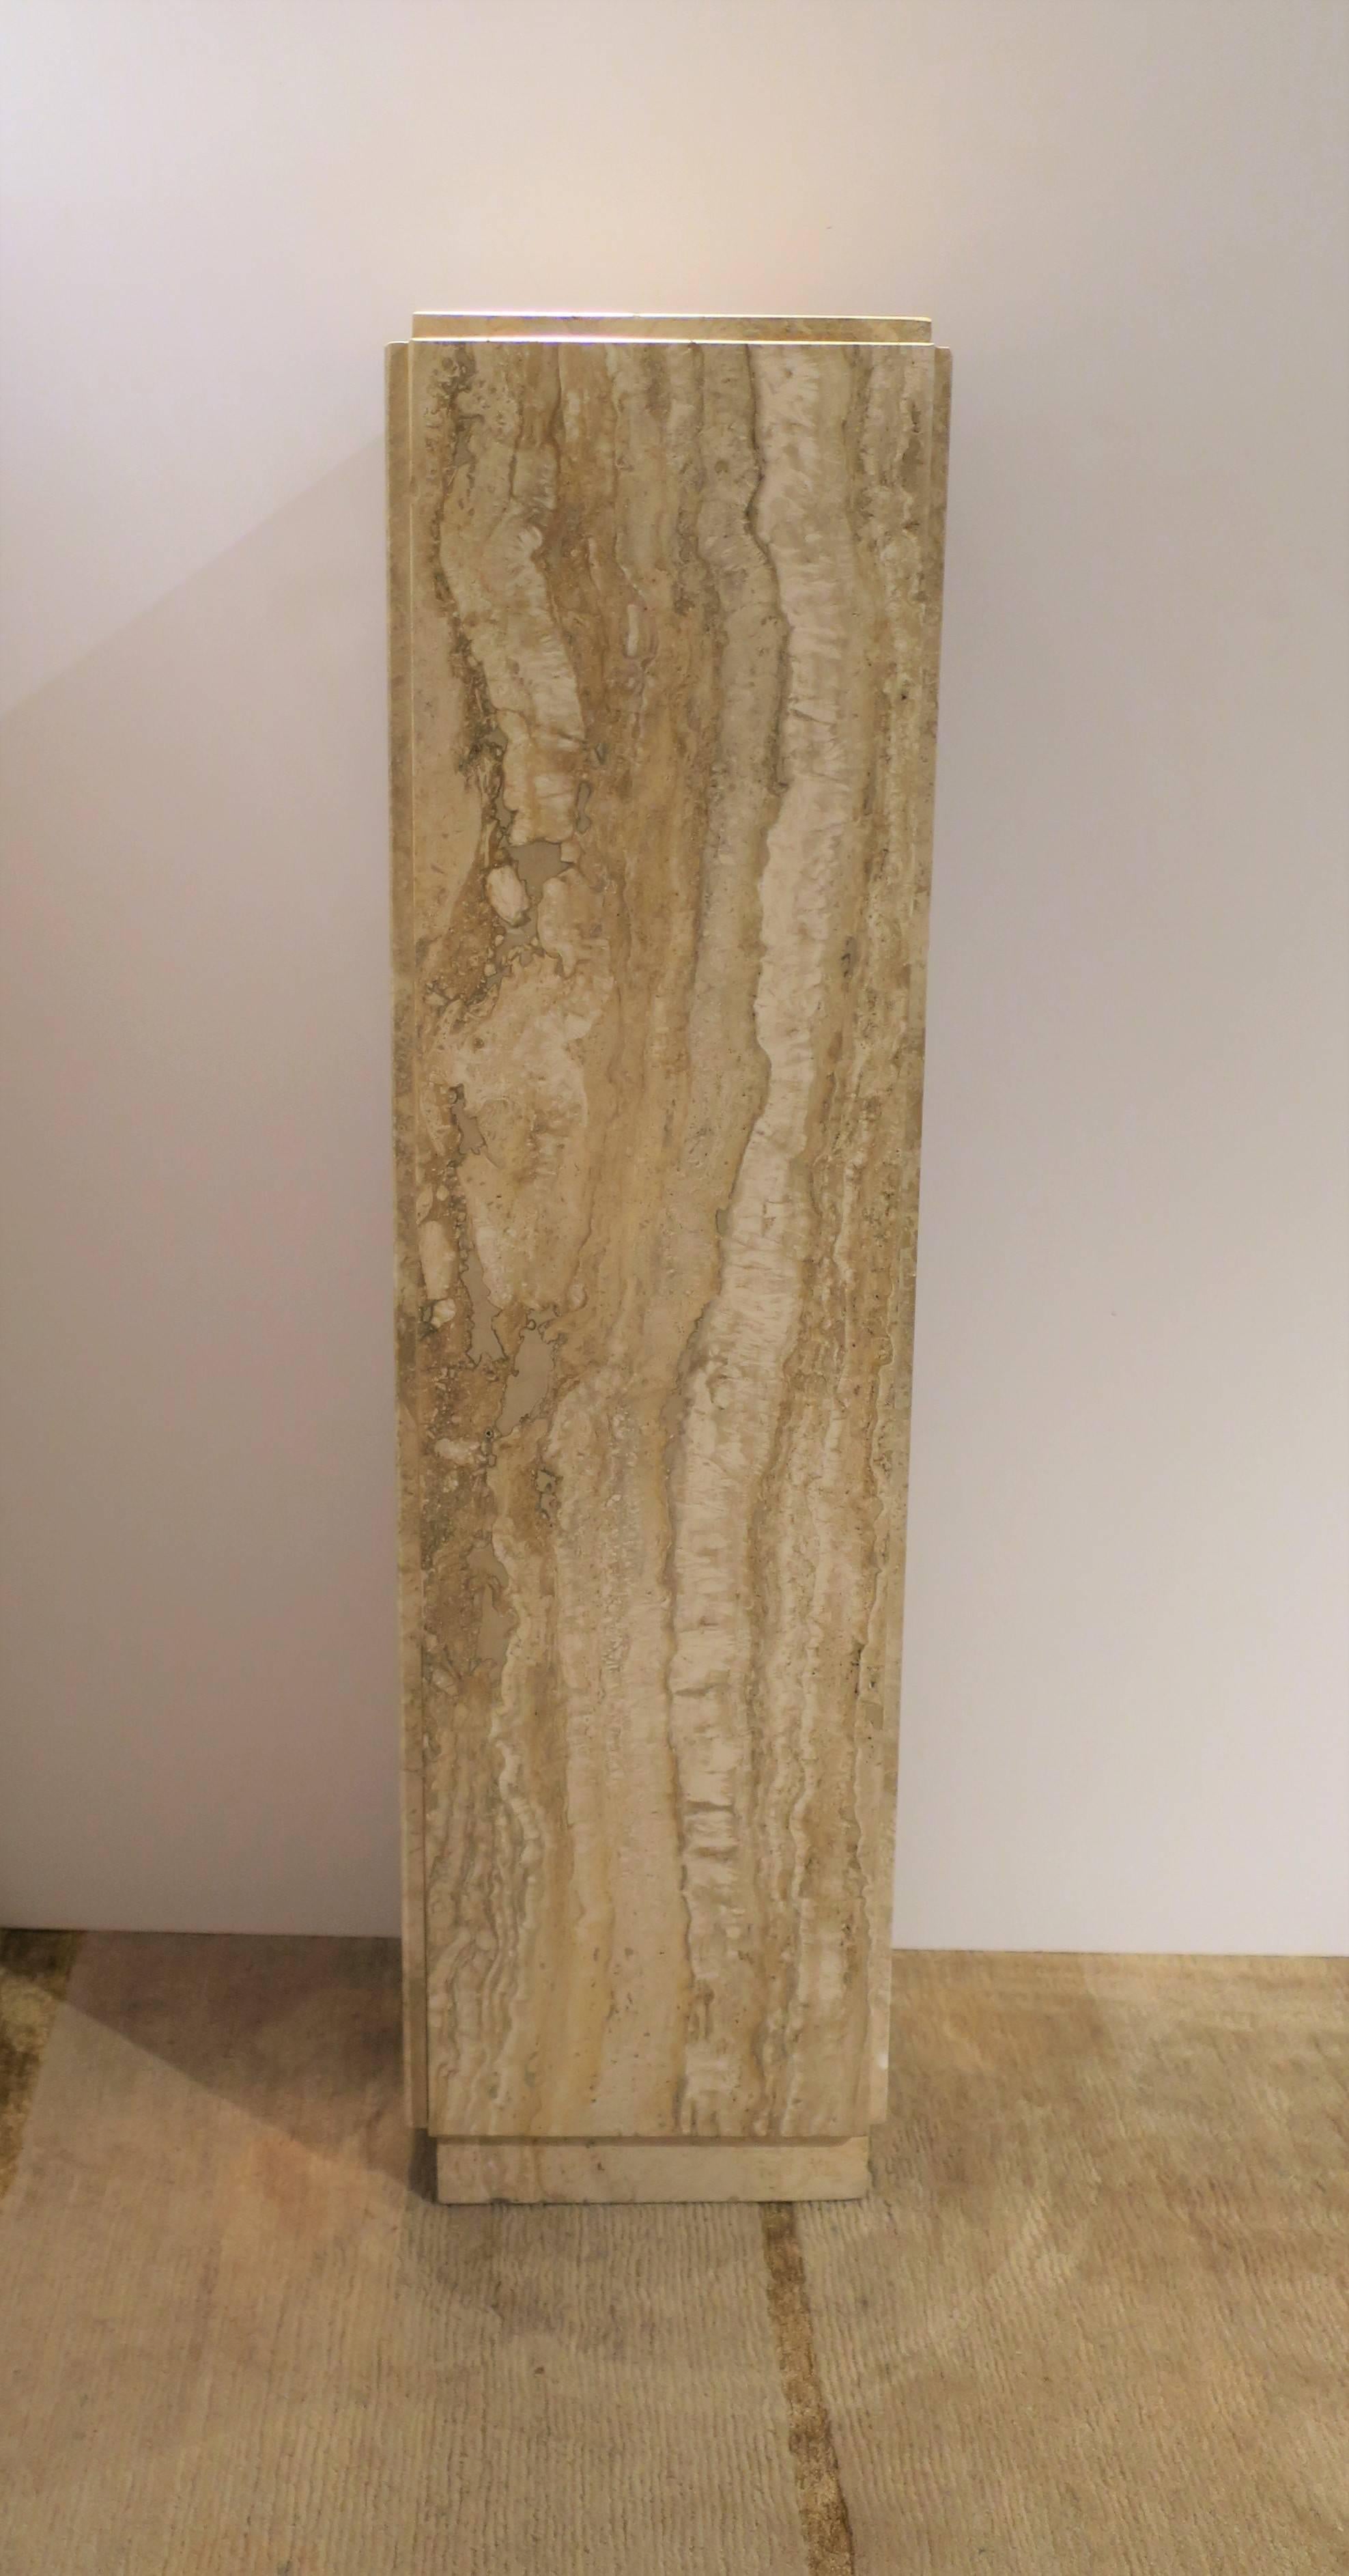 A very beautiful Italian travertine marble pedestal column pillar stand in the style of designer Angelo Mangiarotti, '70s modern or Postmodern period, circa 1970s, Italy. Colors include, white, sand, cream, and light browns. The travertine marble